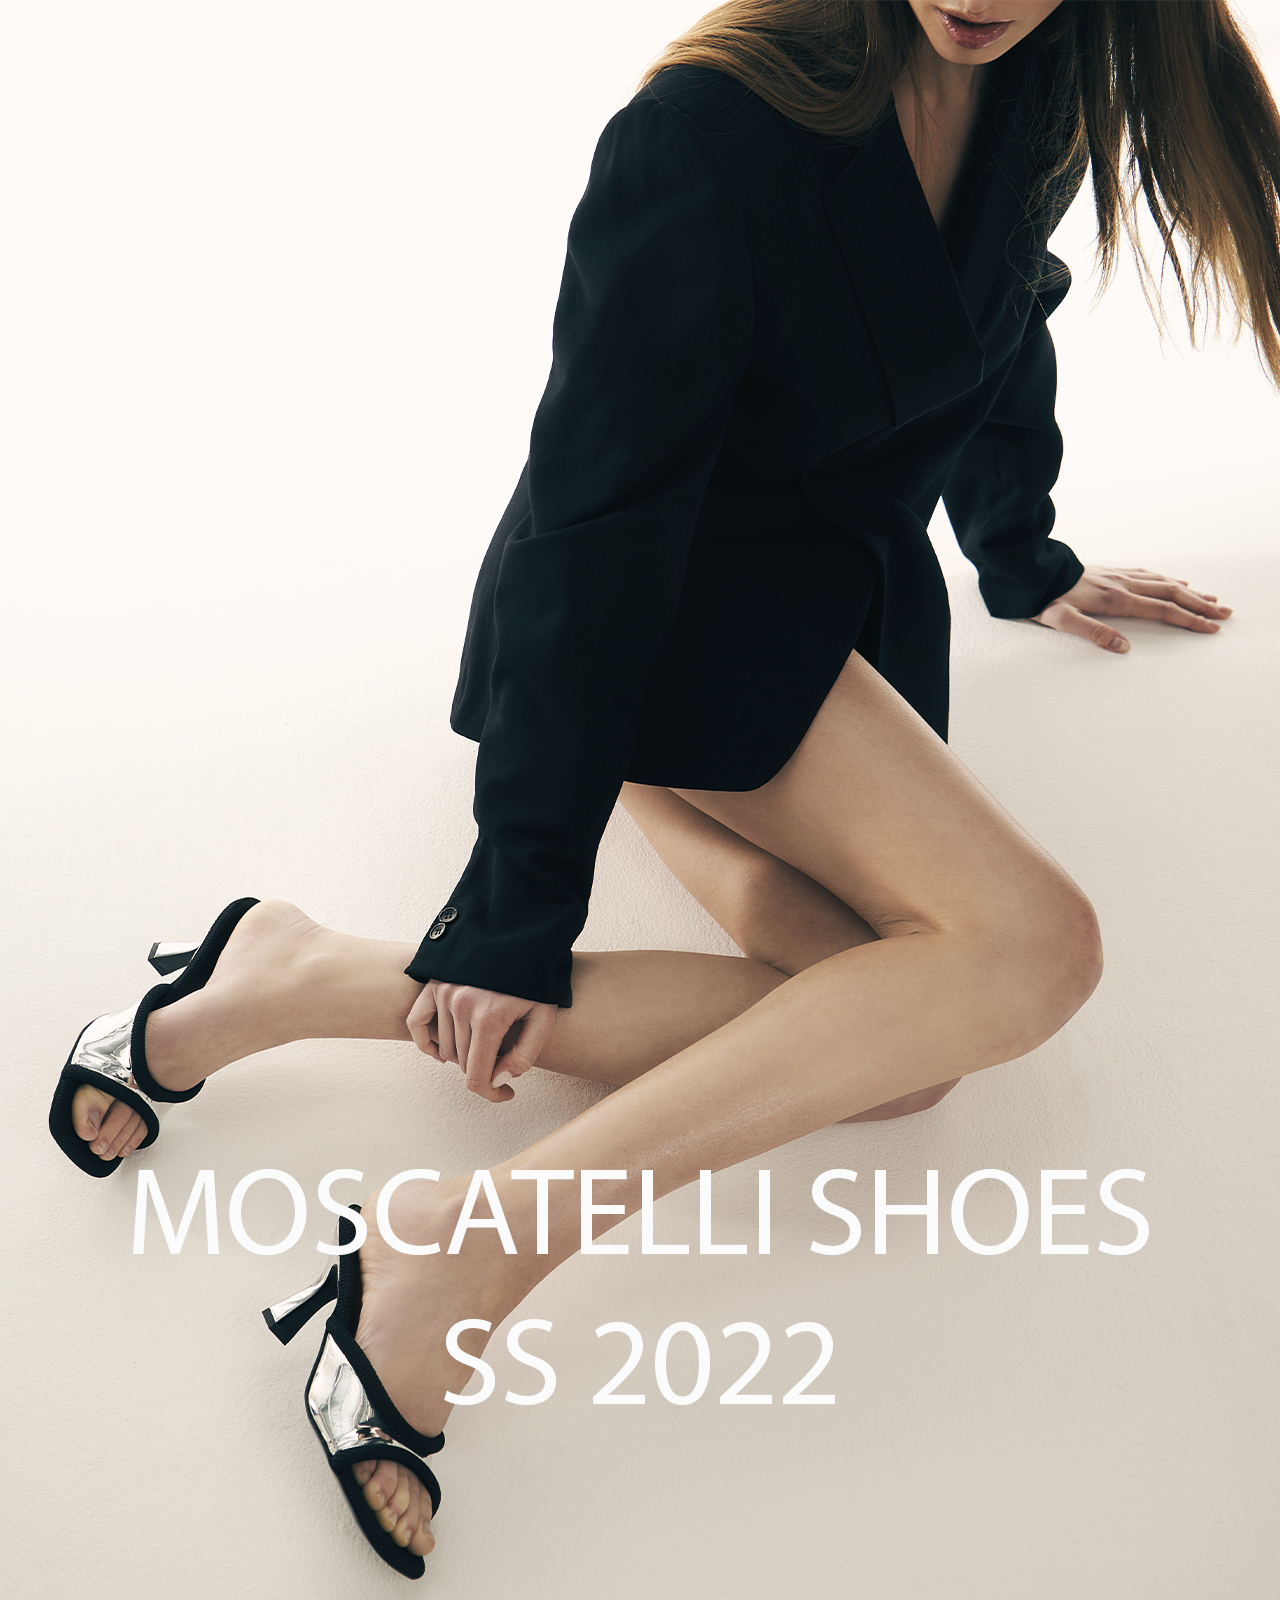 Moscatelli Shoes SS 22 by Andrea Reina